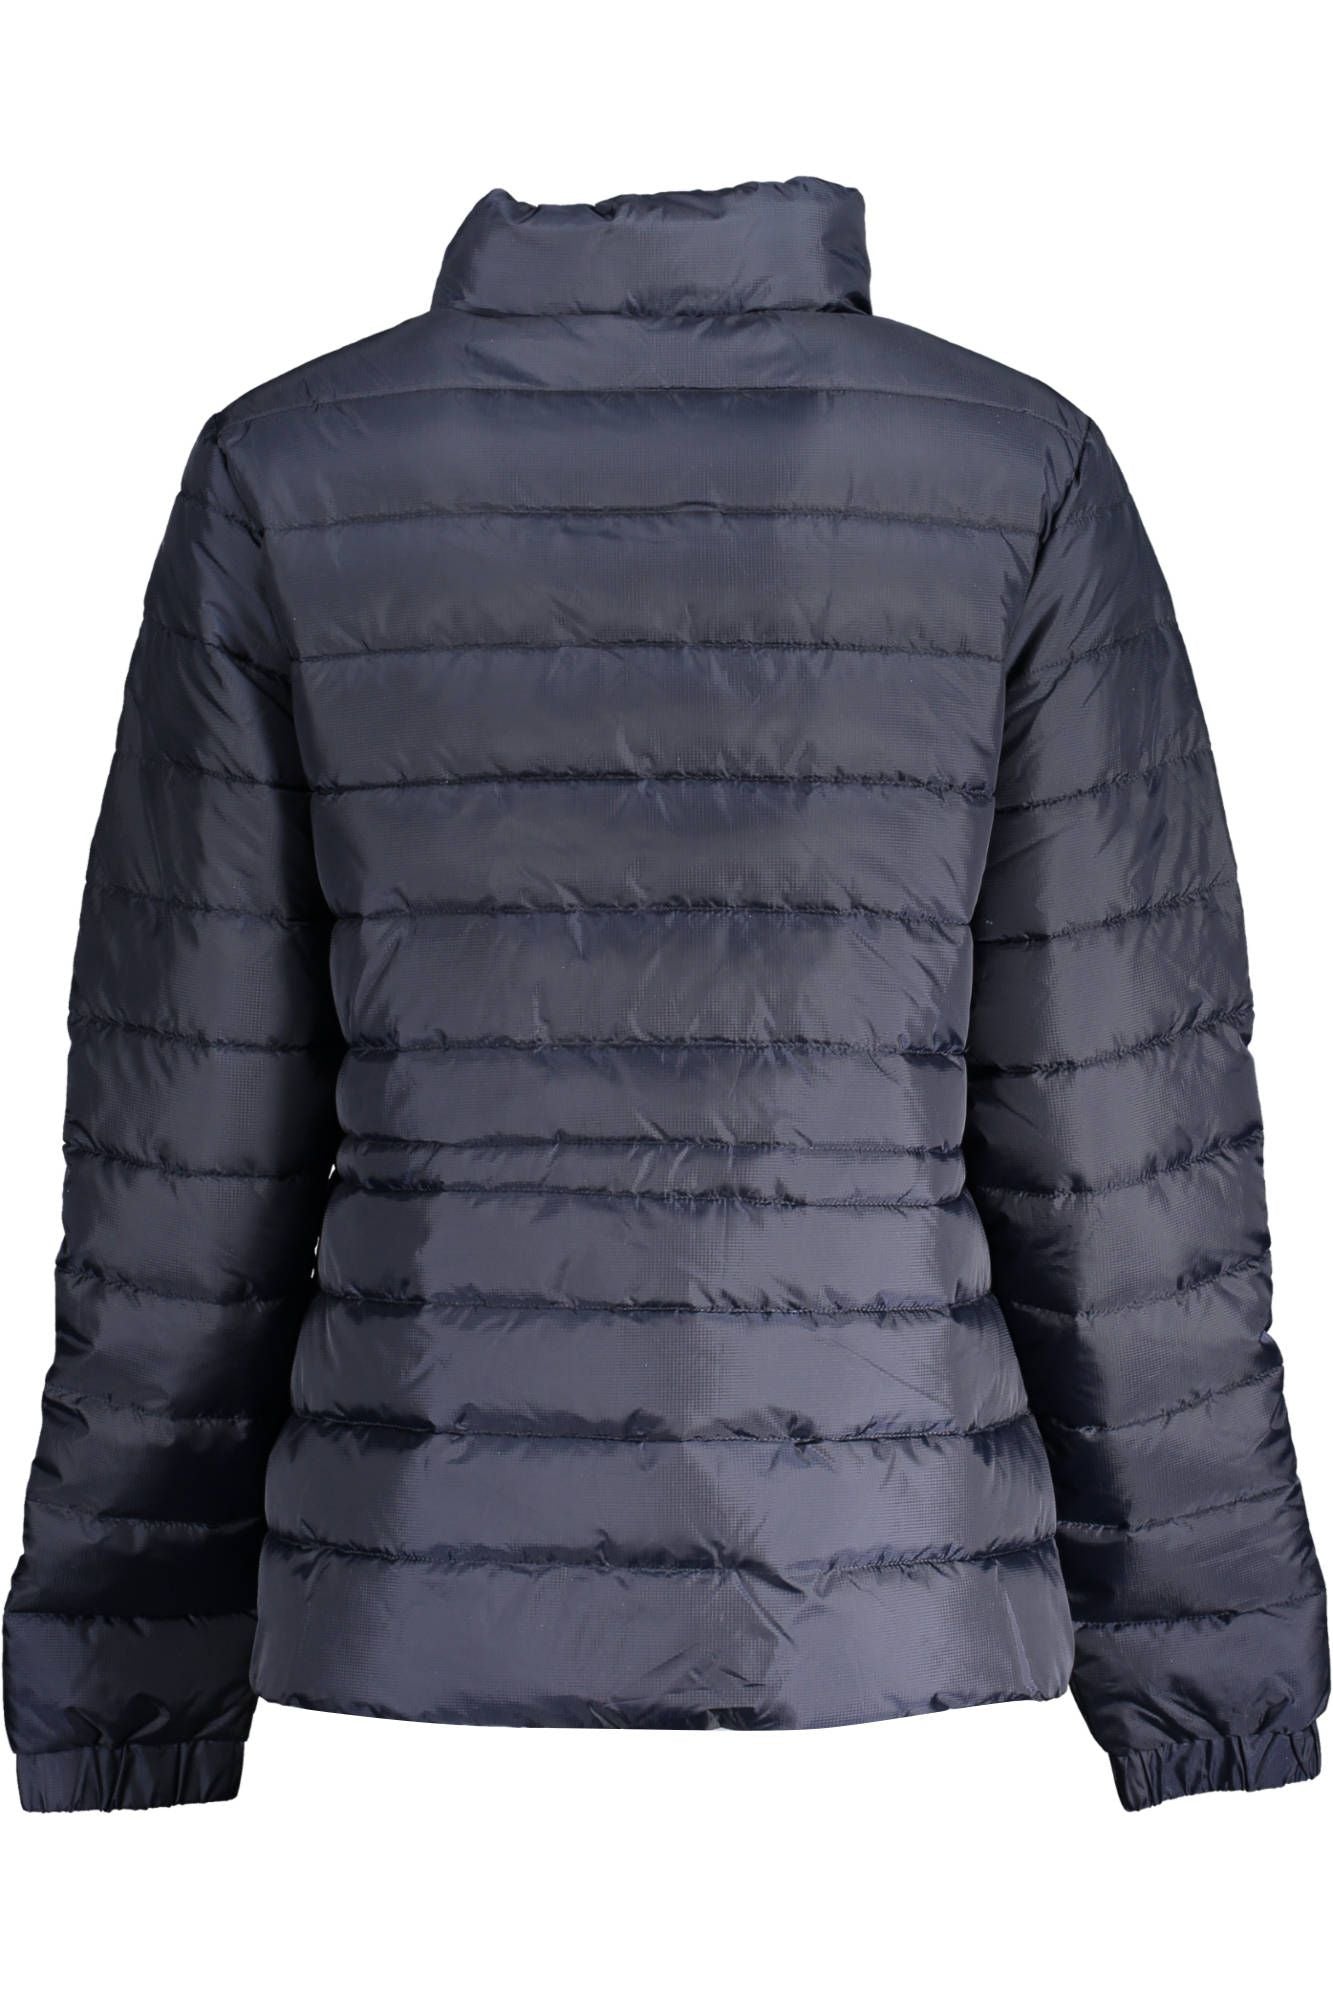 North Sails Chic Water-Resistant Blue Jacket with Eco-Conscious Appeal